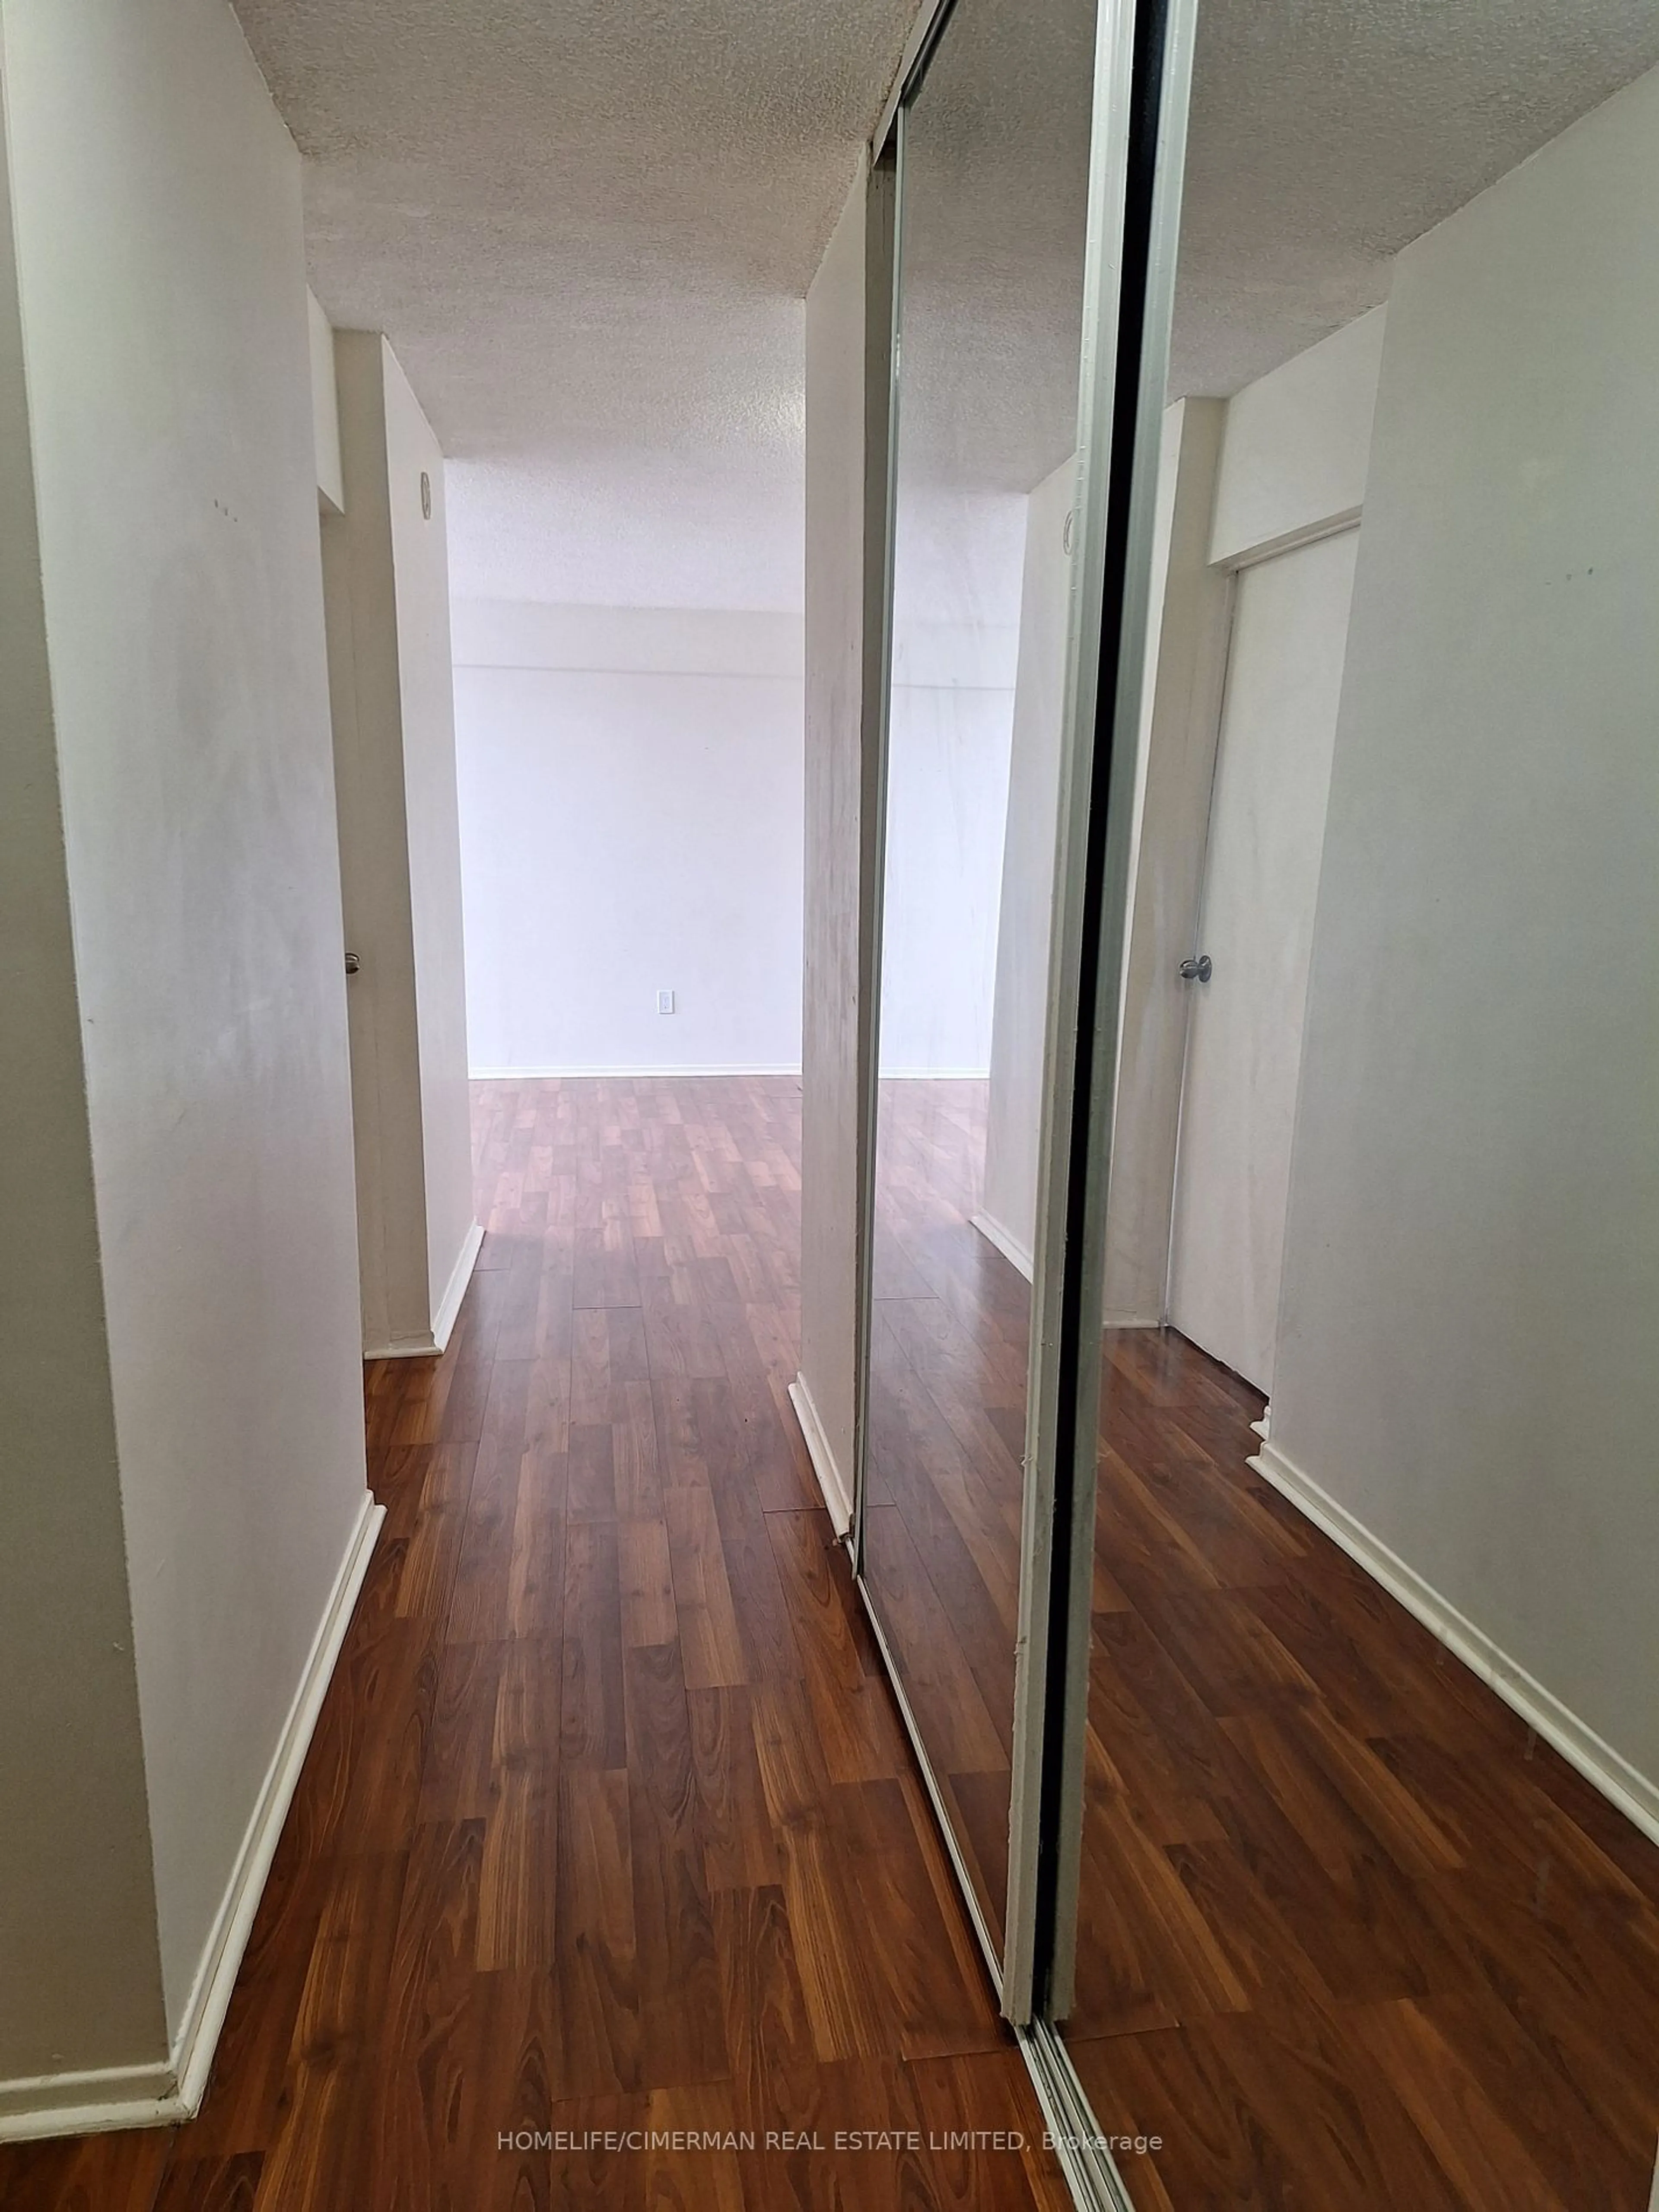 A pic of a room for 940 Caledonia Rd #1008, Toronto Ontario M6B 3Y4